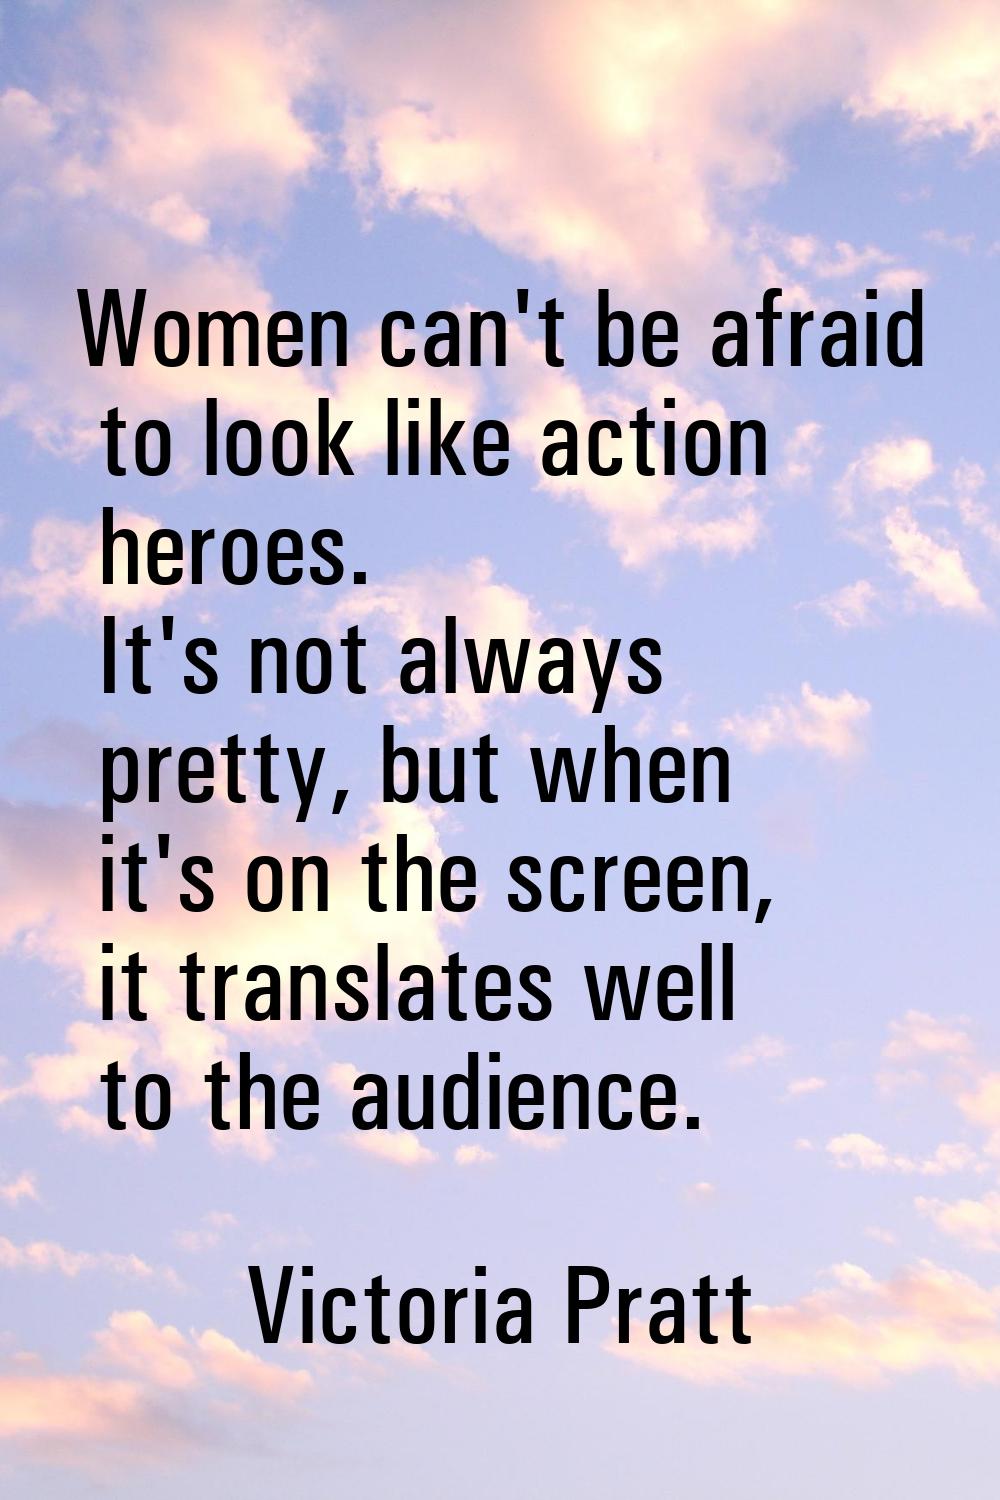 Women can't be afraid to look like action heroes. It's not always pretty, but when it's on the scre